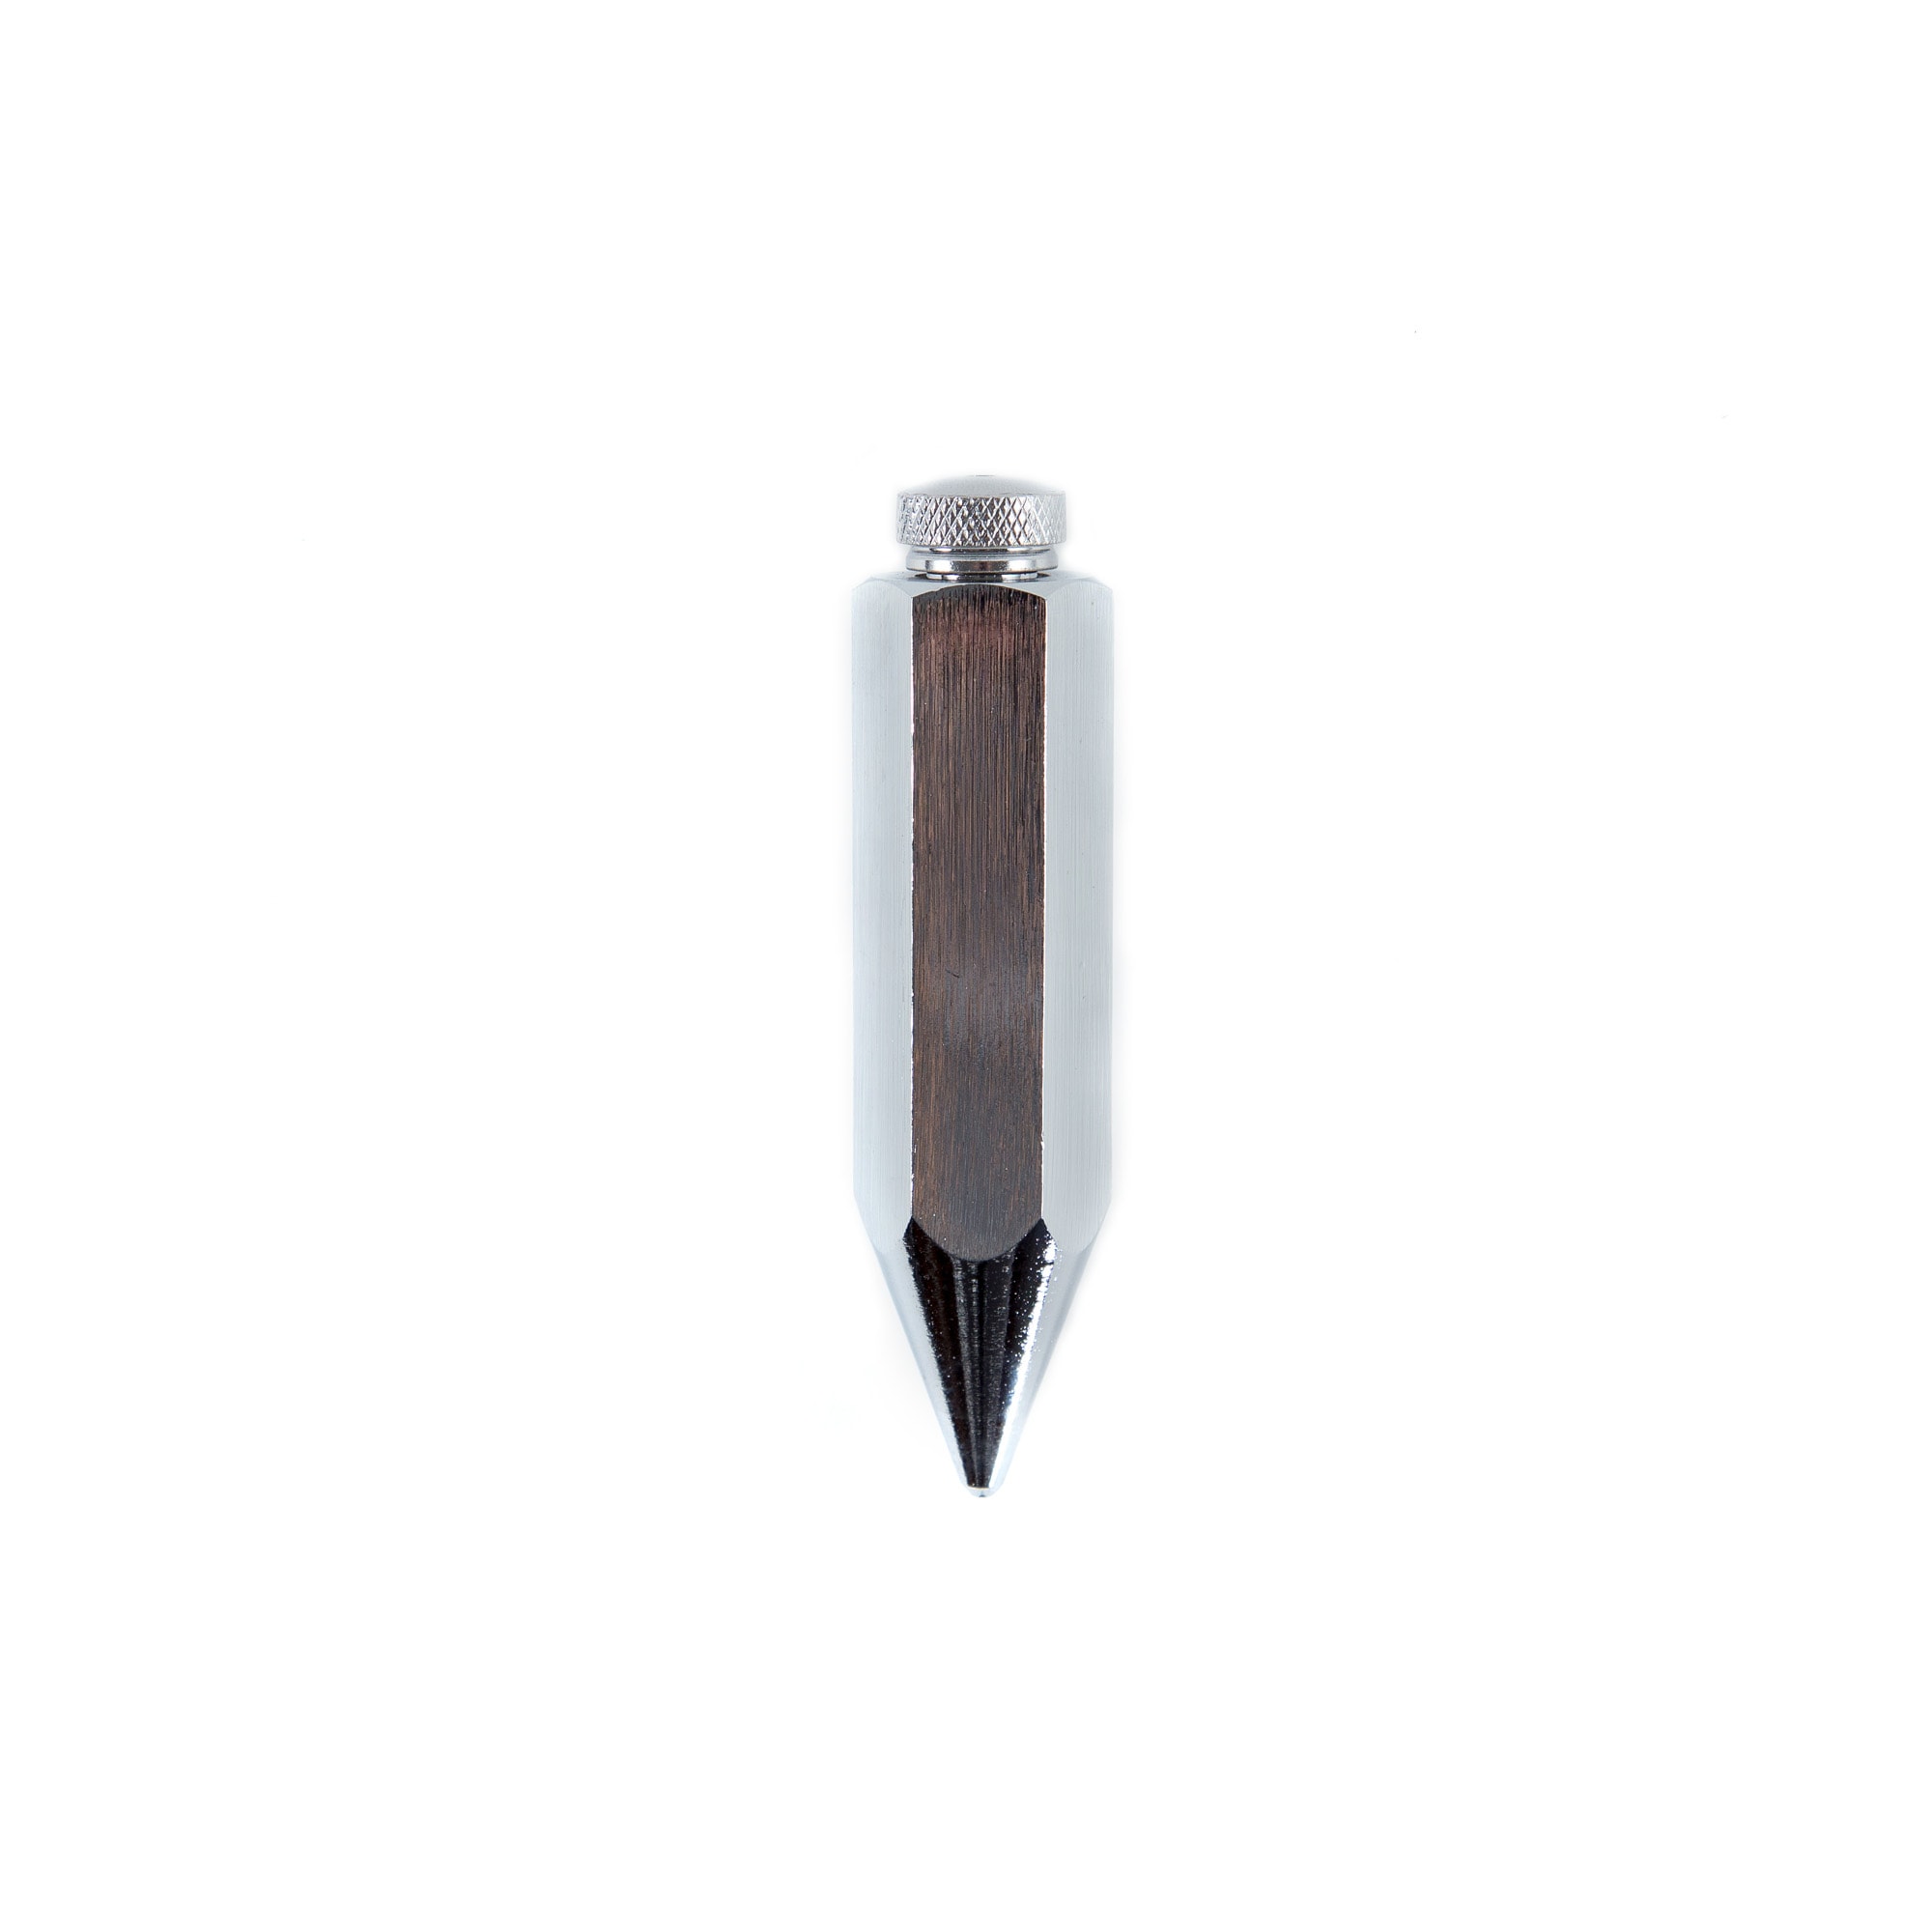 Swanson Tool Company Steel 4-in Plumb Bob in the Levels department at